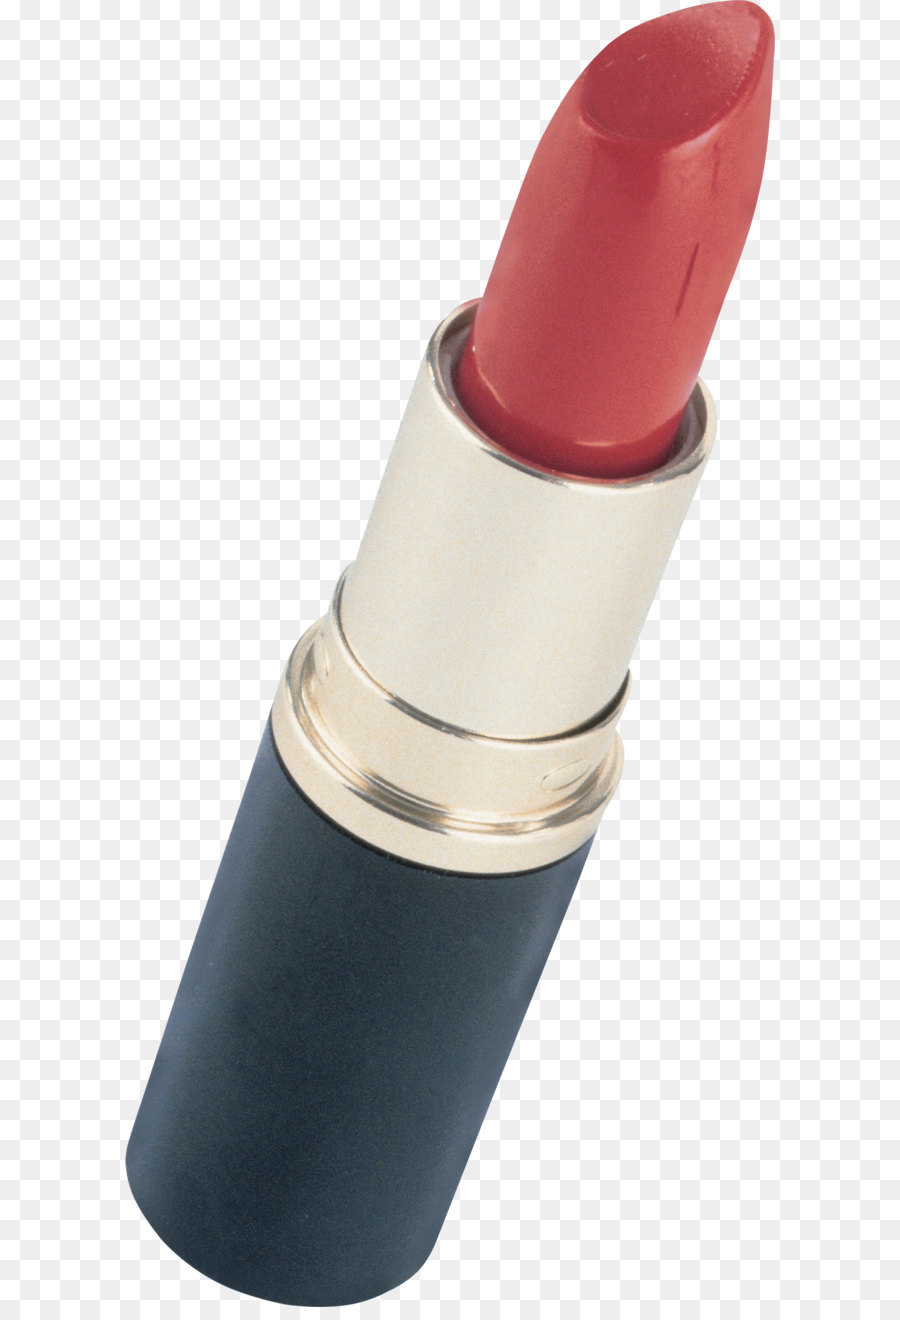 Rossetto Clip art - rossetto png